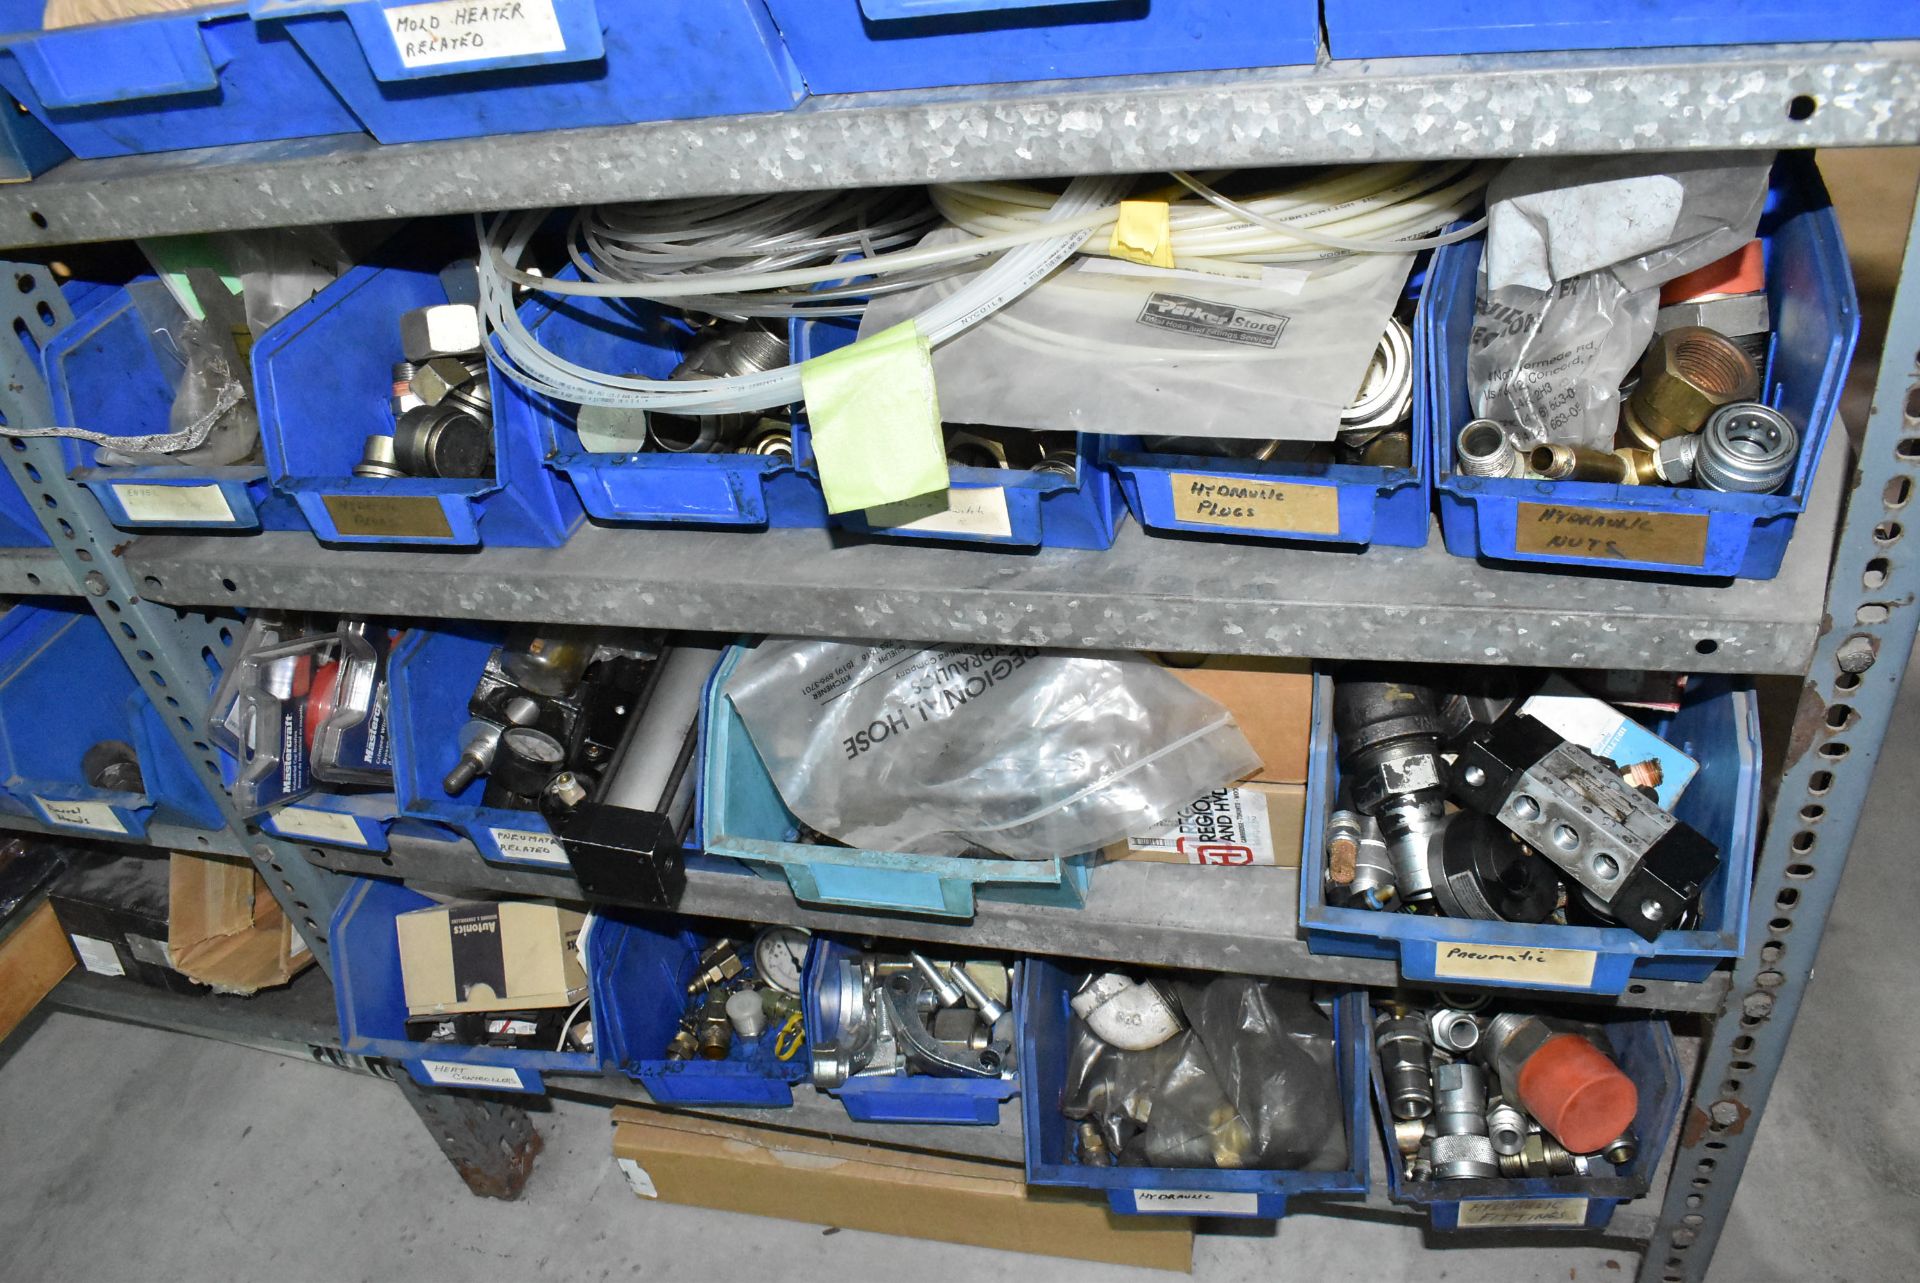 LOT/ CONTENTS OF SHELF CONSISTING OF ELECTRICAL SUPPLIES AND HARDWARE - Image 4 of 4